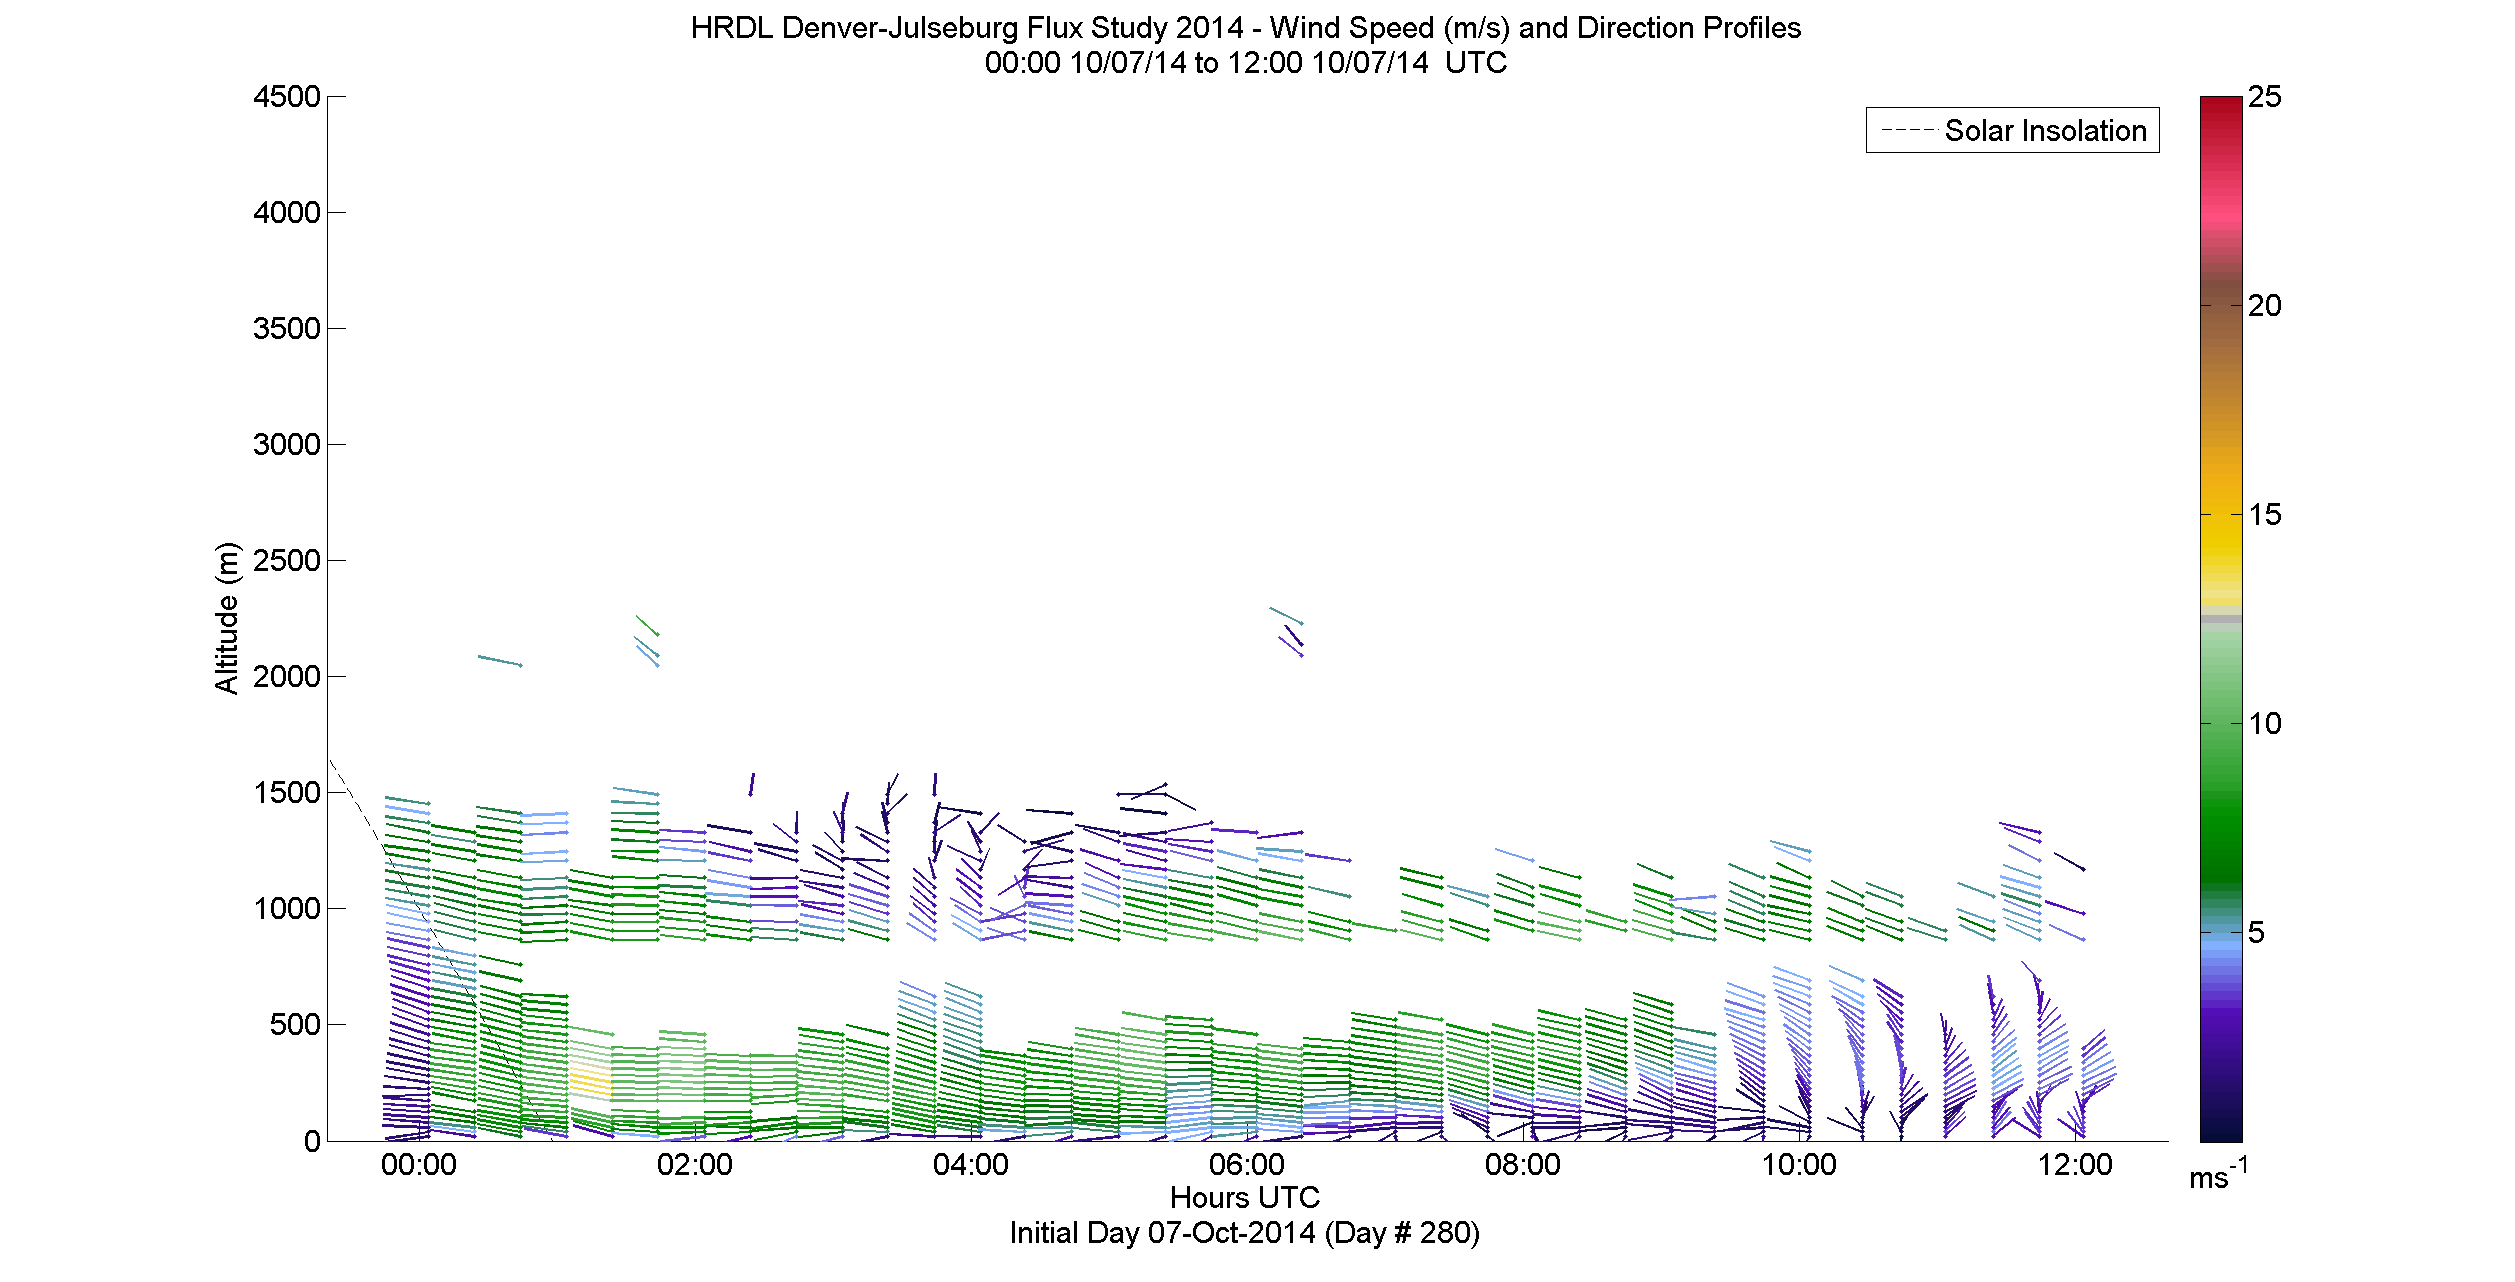 HRDL speed and direction profile - October 7 am